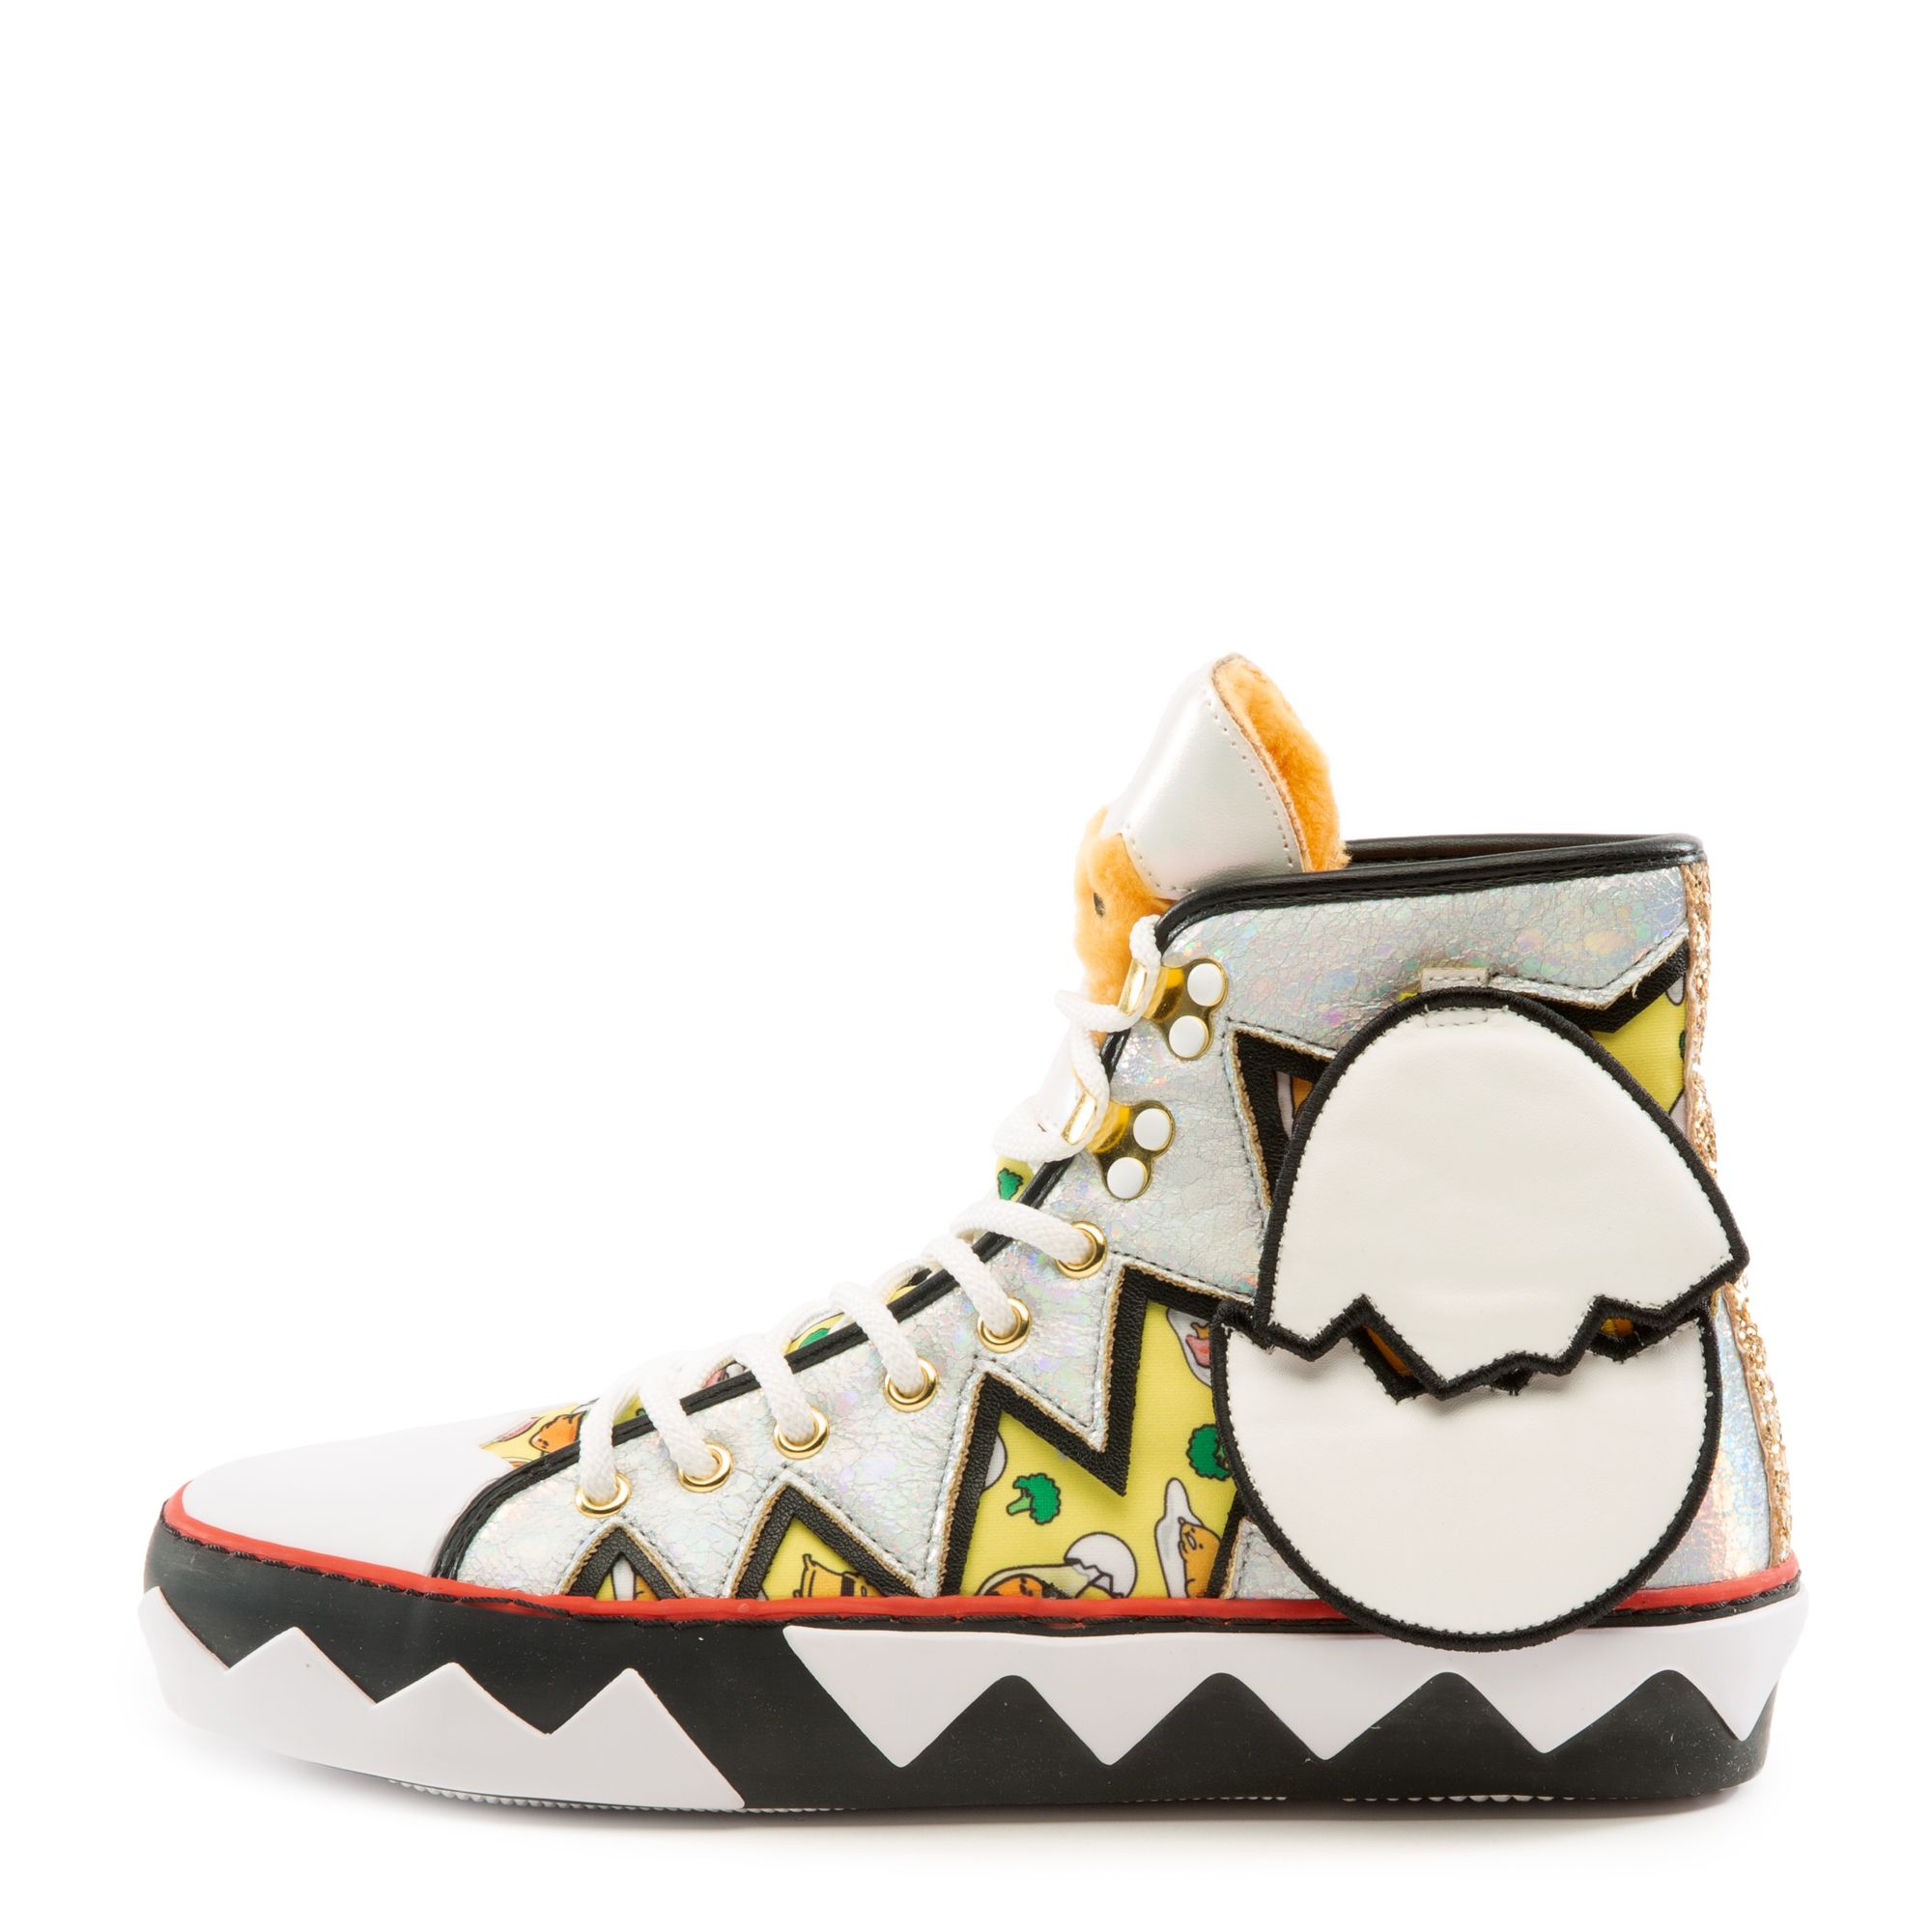 IRREGULAR CHOICE Hello Kitty's You Crack Me Up High Top Sneaker